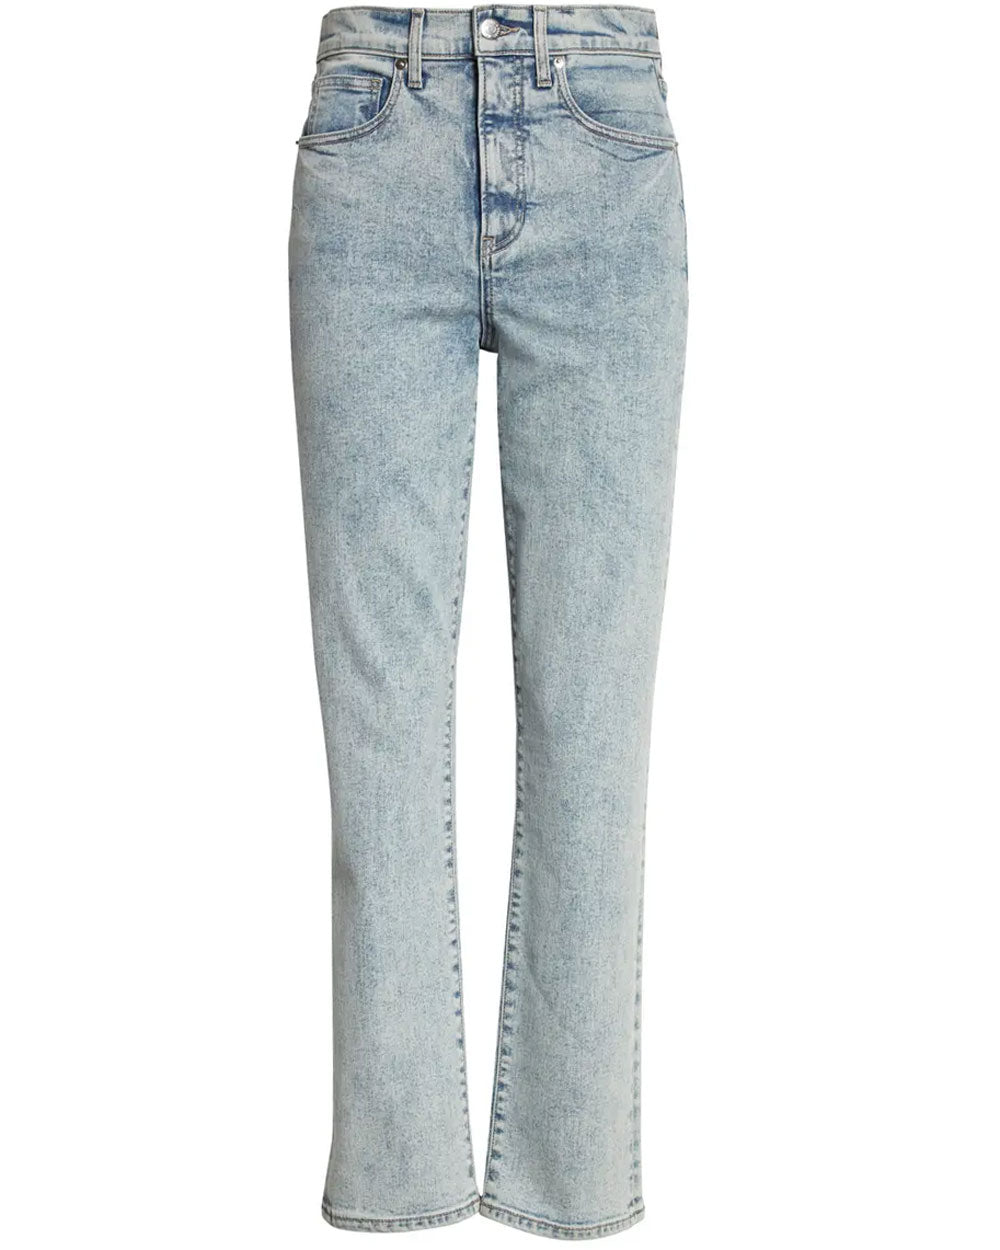 Ryleigh High Rise Slim Straight Jean in Vail